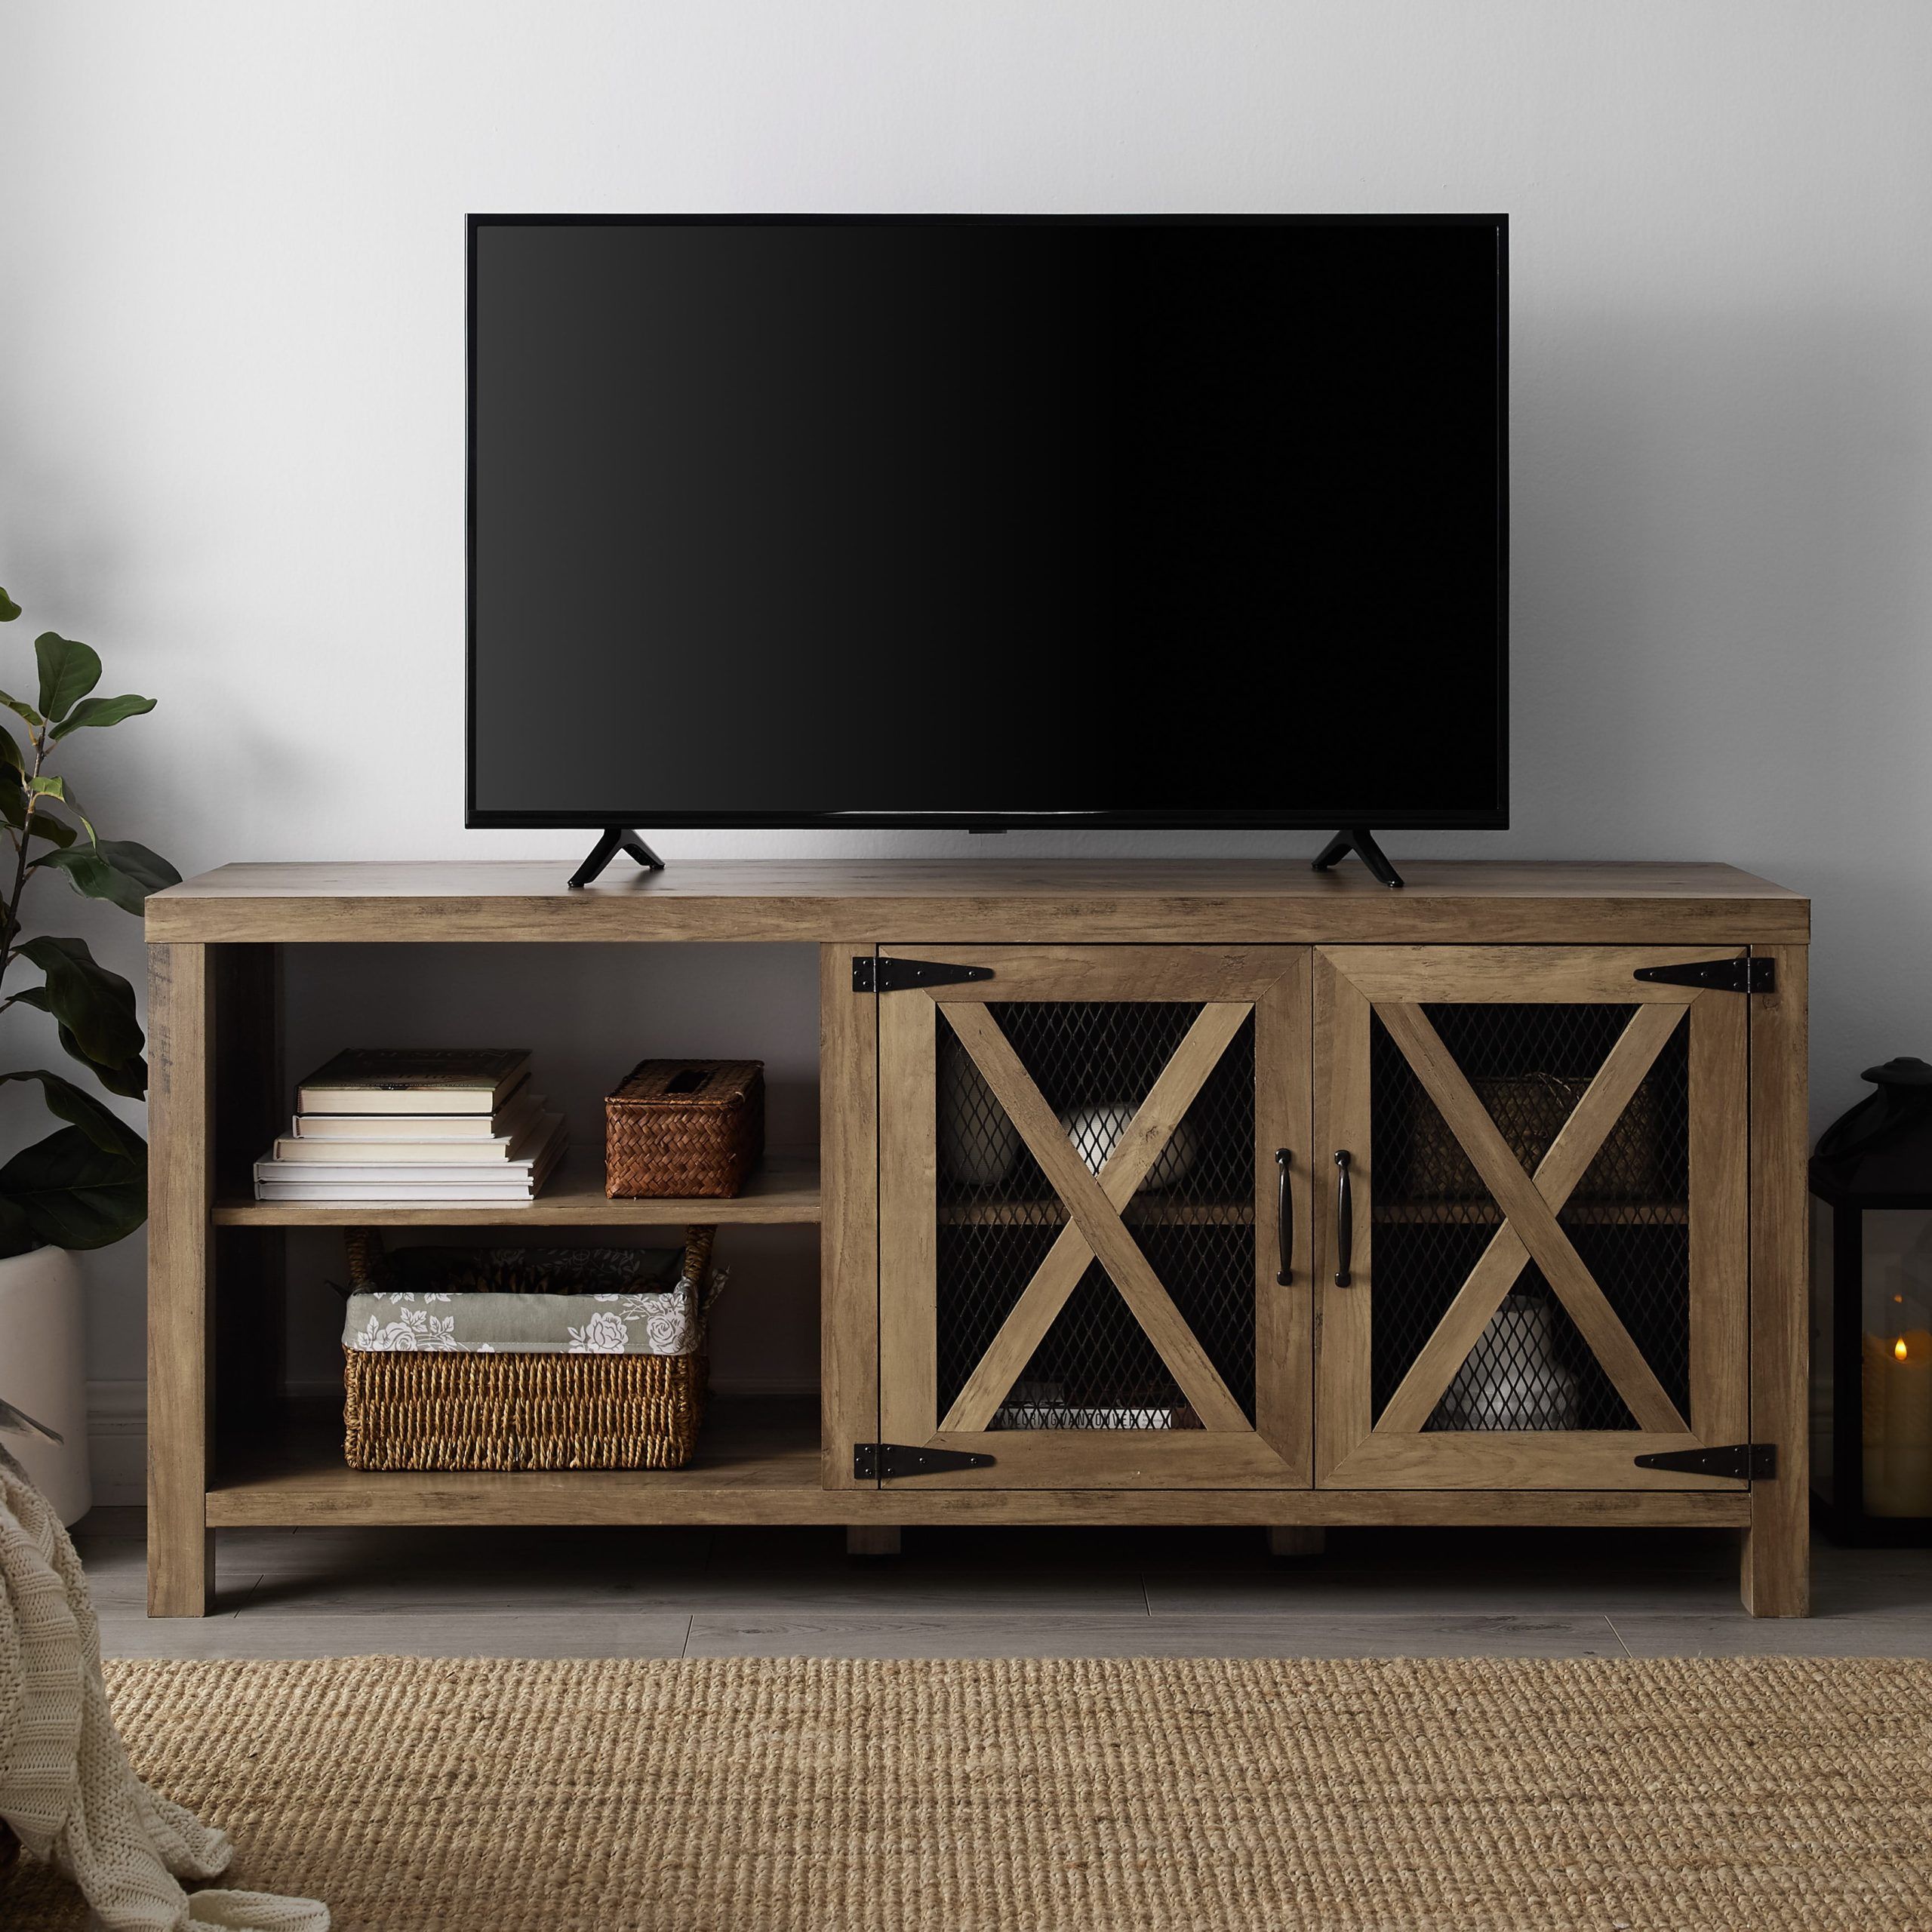 Manor Park Farmhouse Tv Stand For Tvs Up To 65", Reclaimed Barnwood Regarding Farmhouse Tv Stands (View 4 of 20)